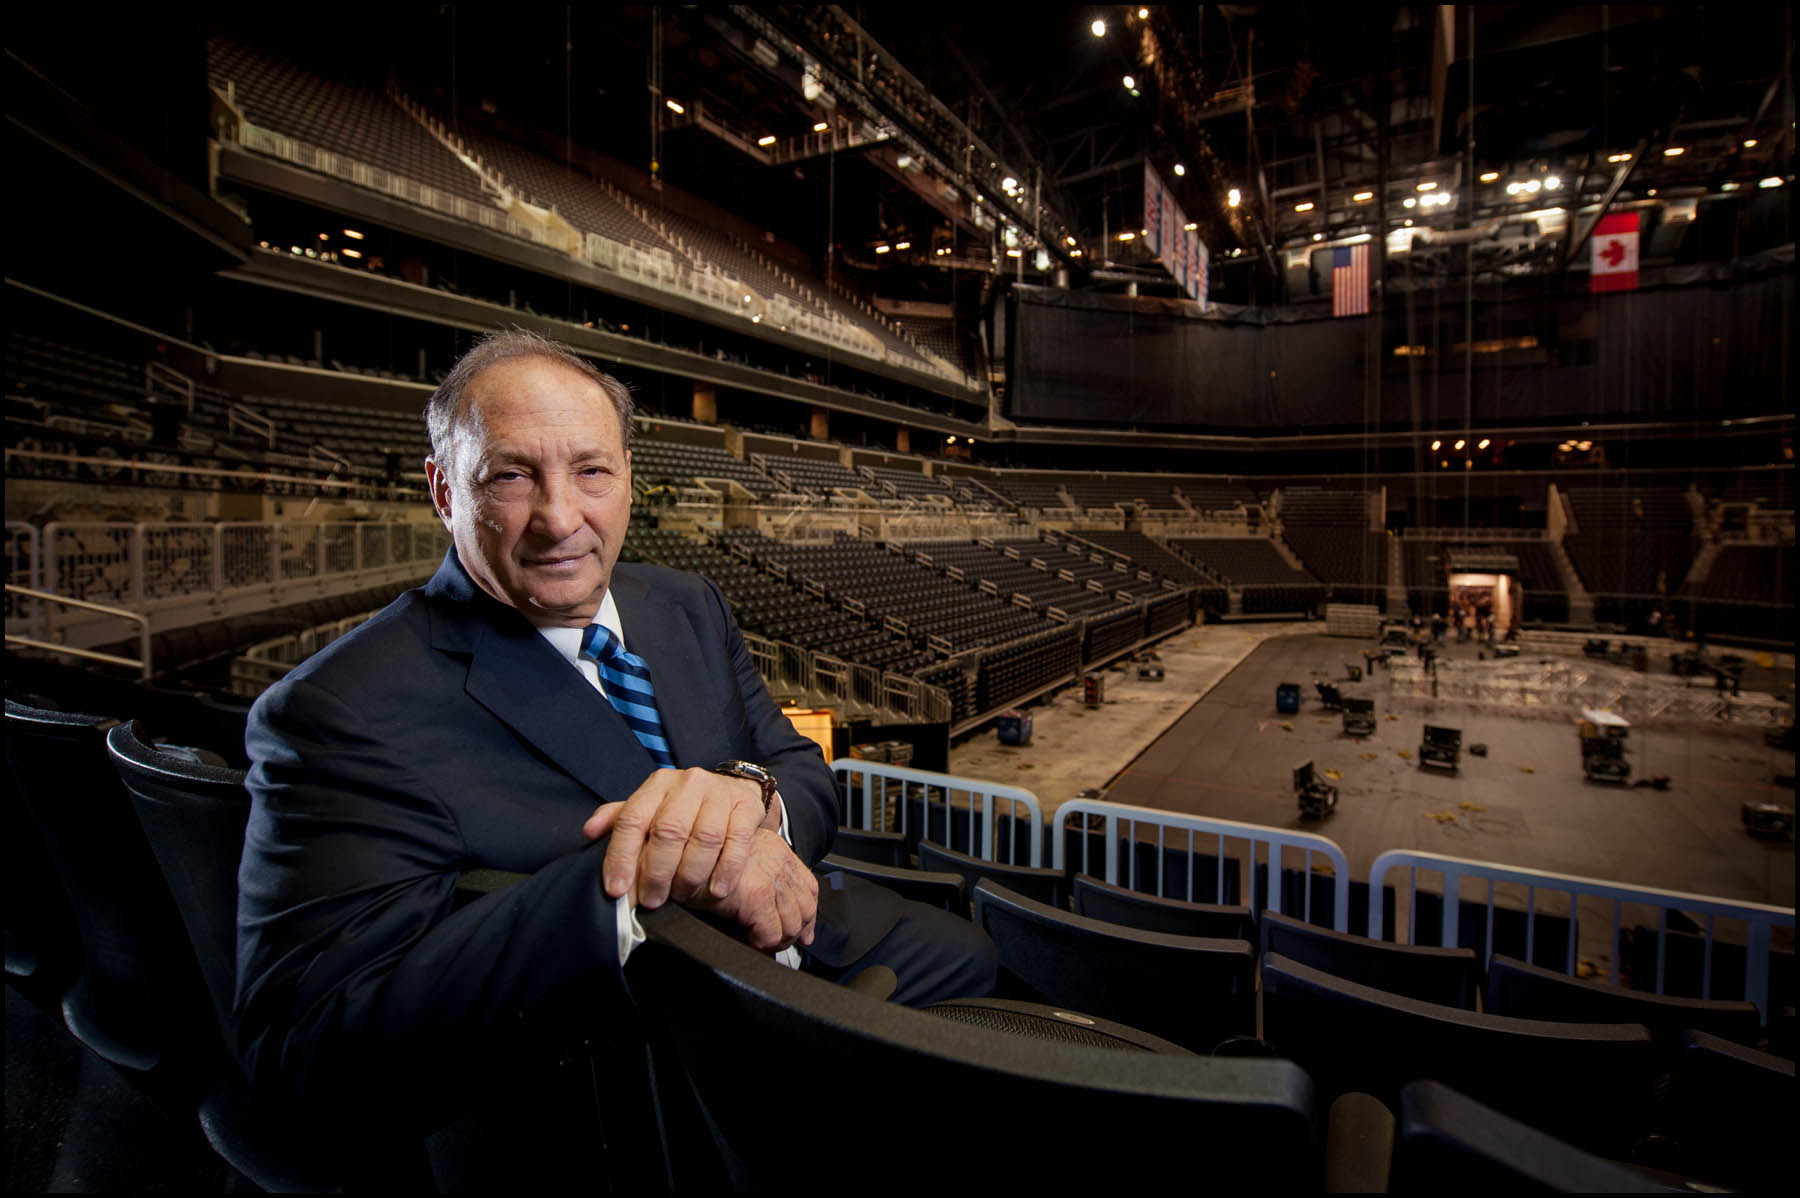 Brooklyn Nets co-owner and developer Bruce Ratner photographed in the new Barclay's Center as the finishing touches are put on the building.